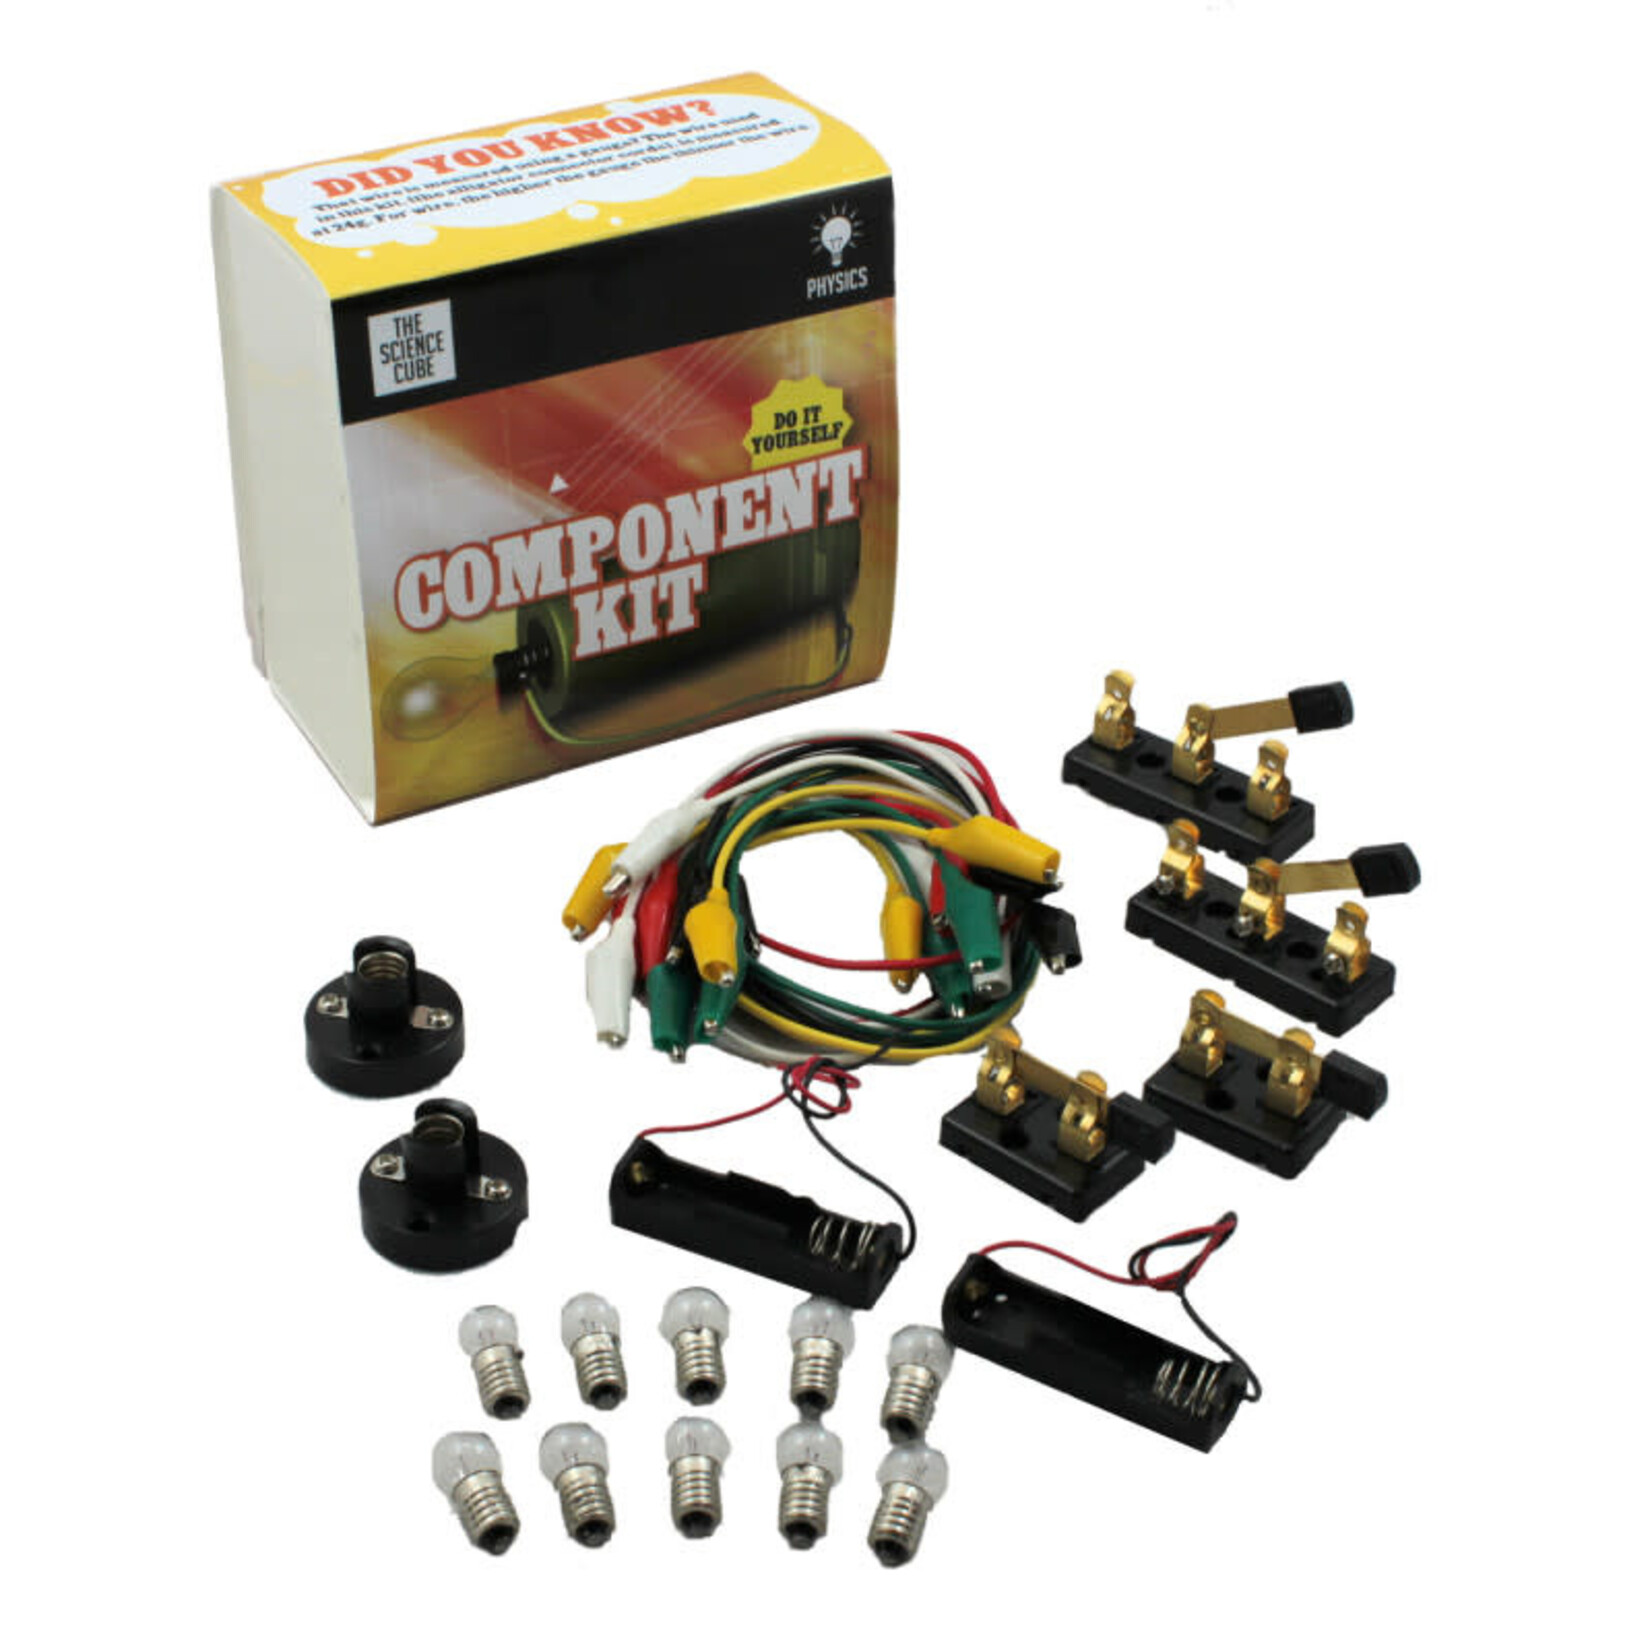 Science Experiment Component Kit